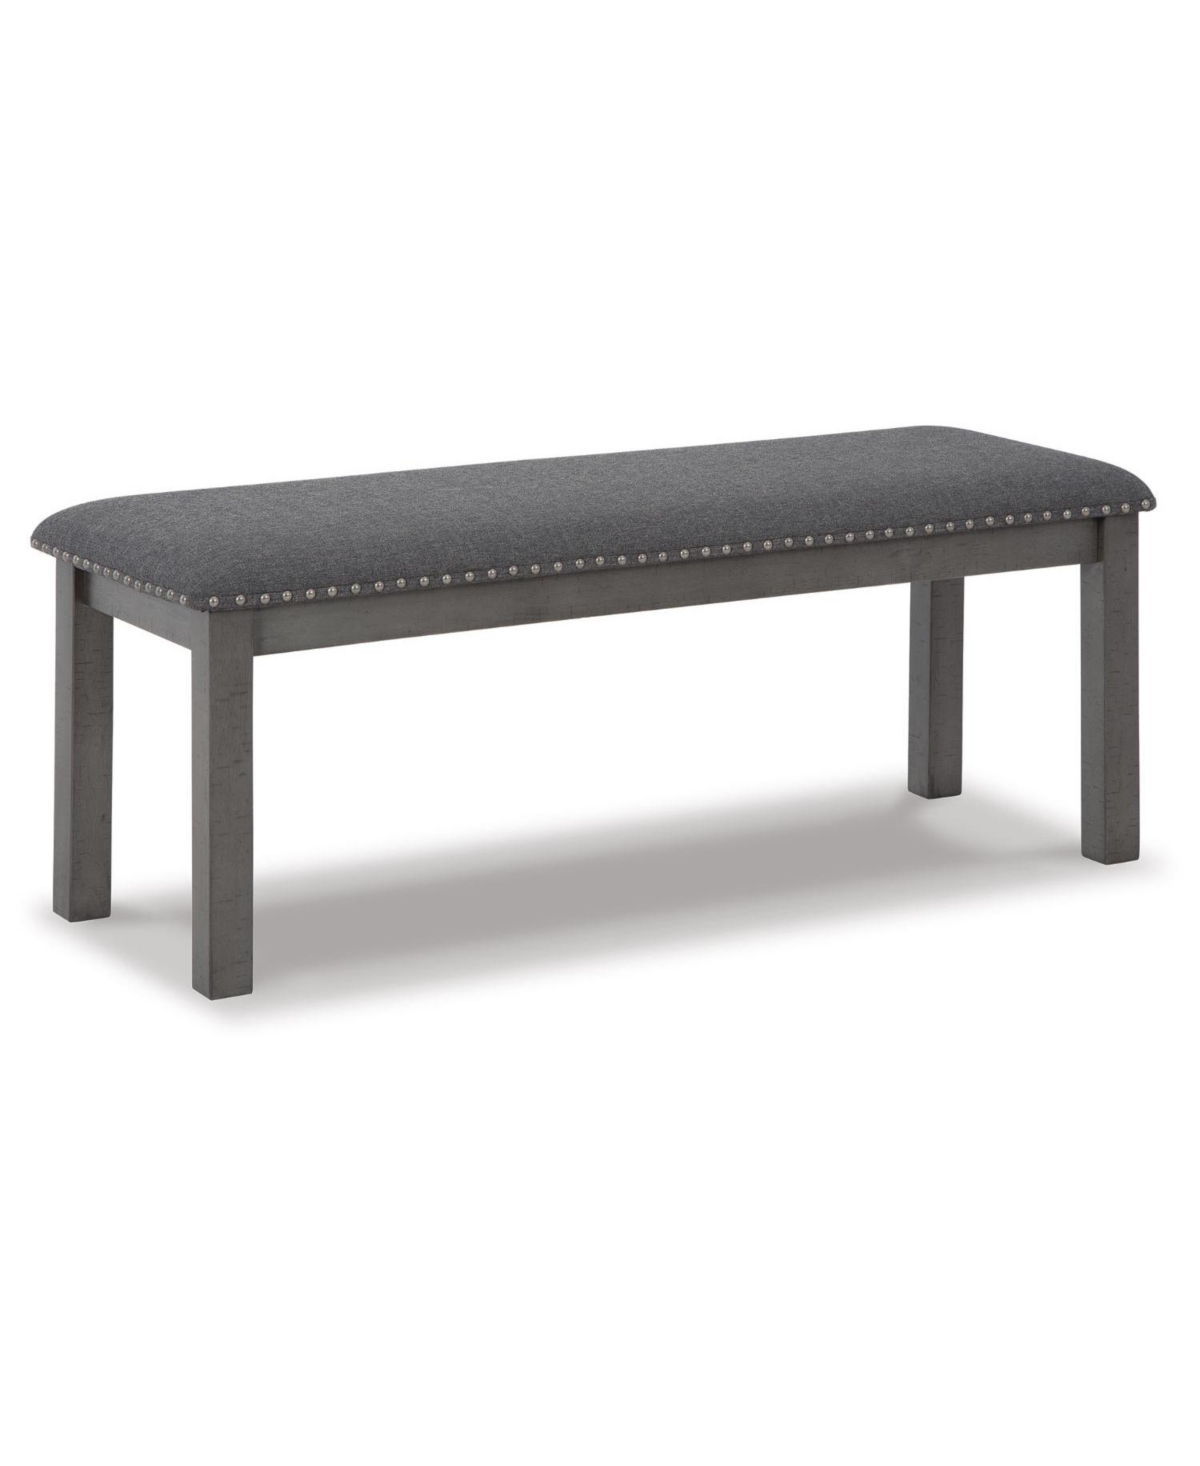 Signature Design By Ashley Myshanna Upholsteryolstered Bench In Gray